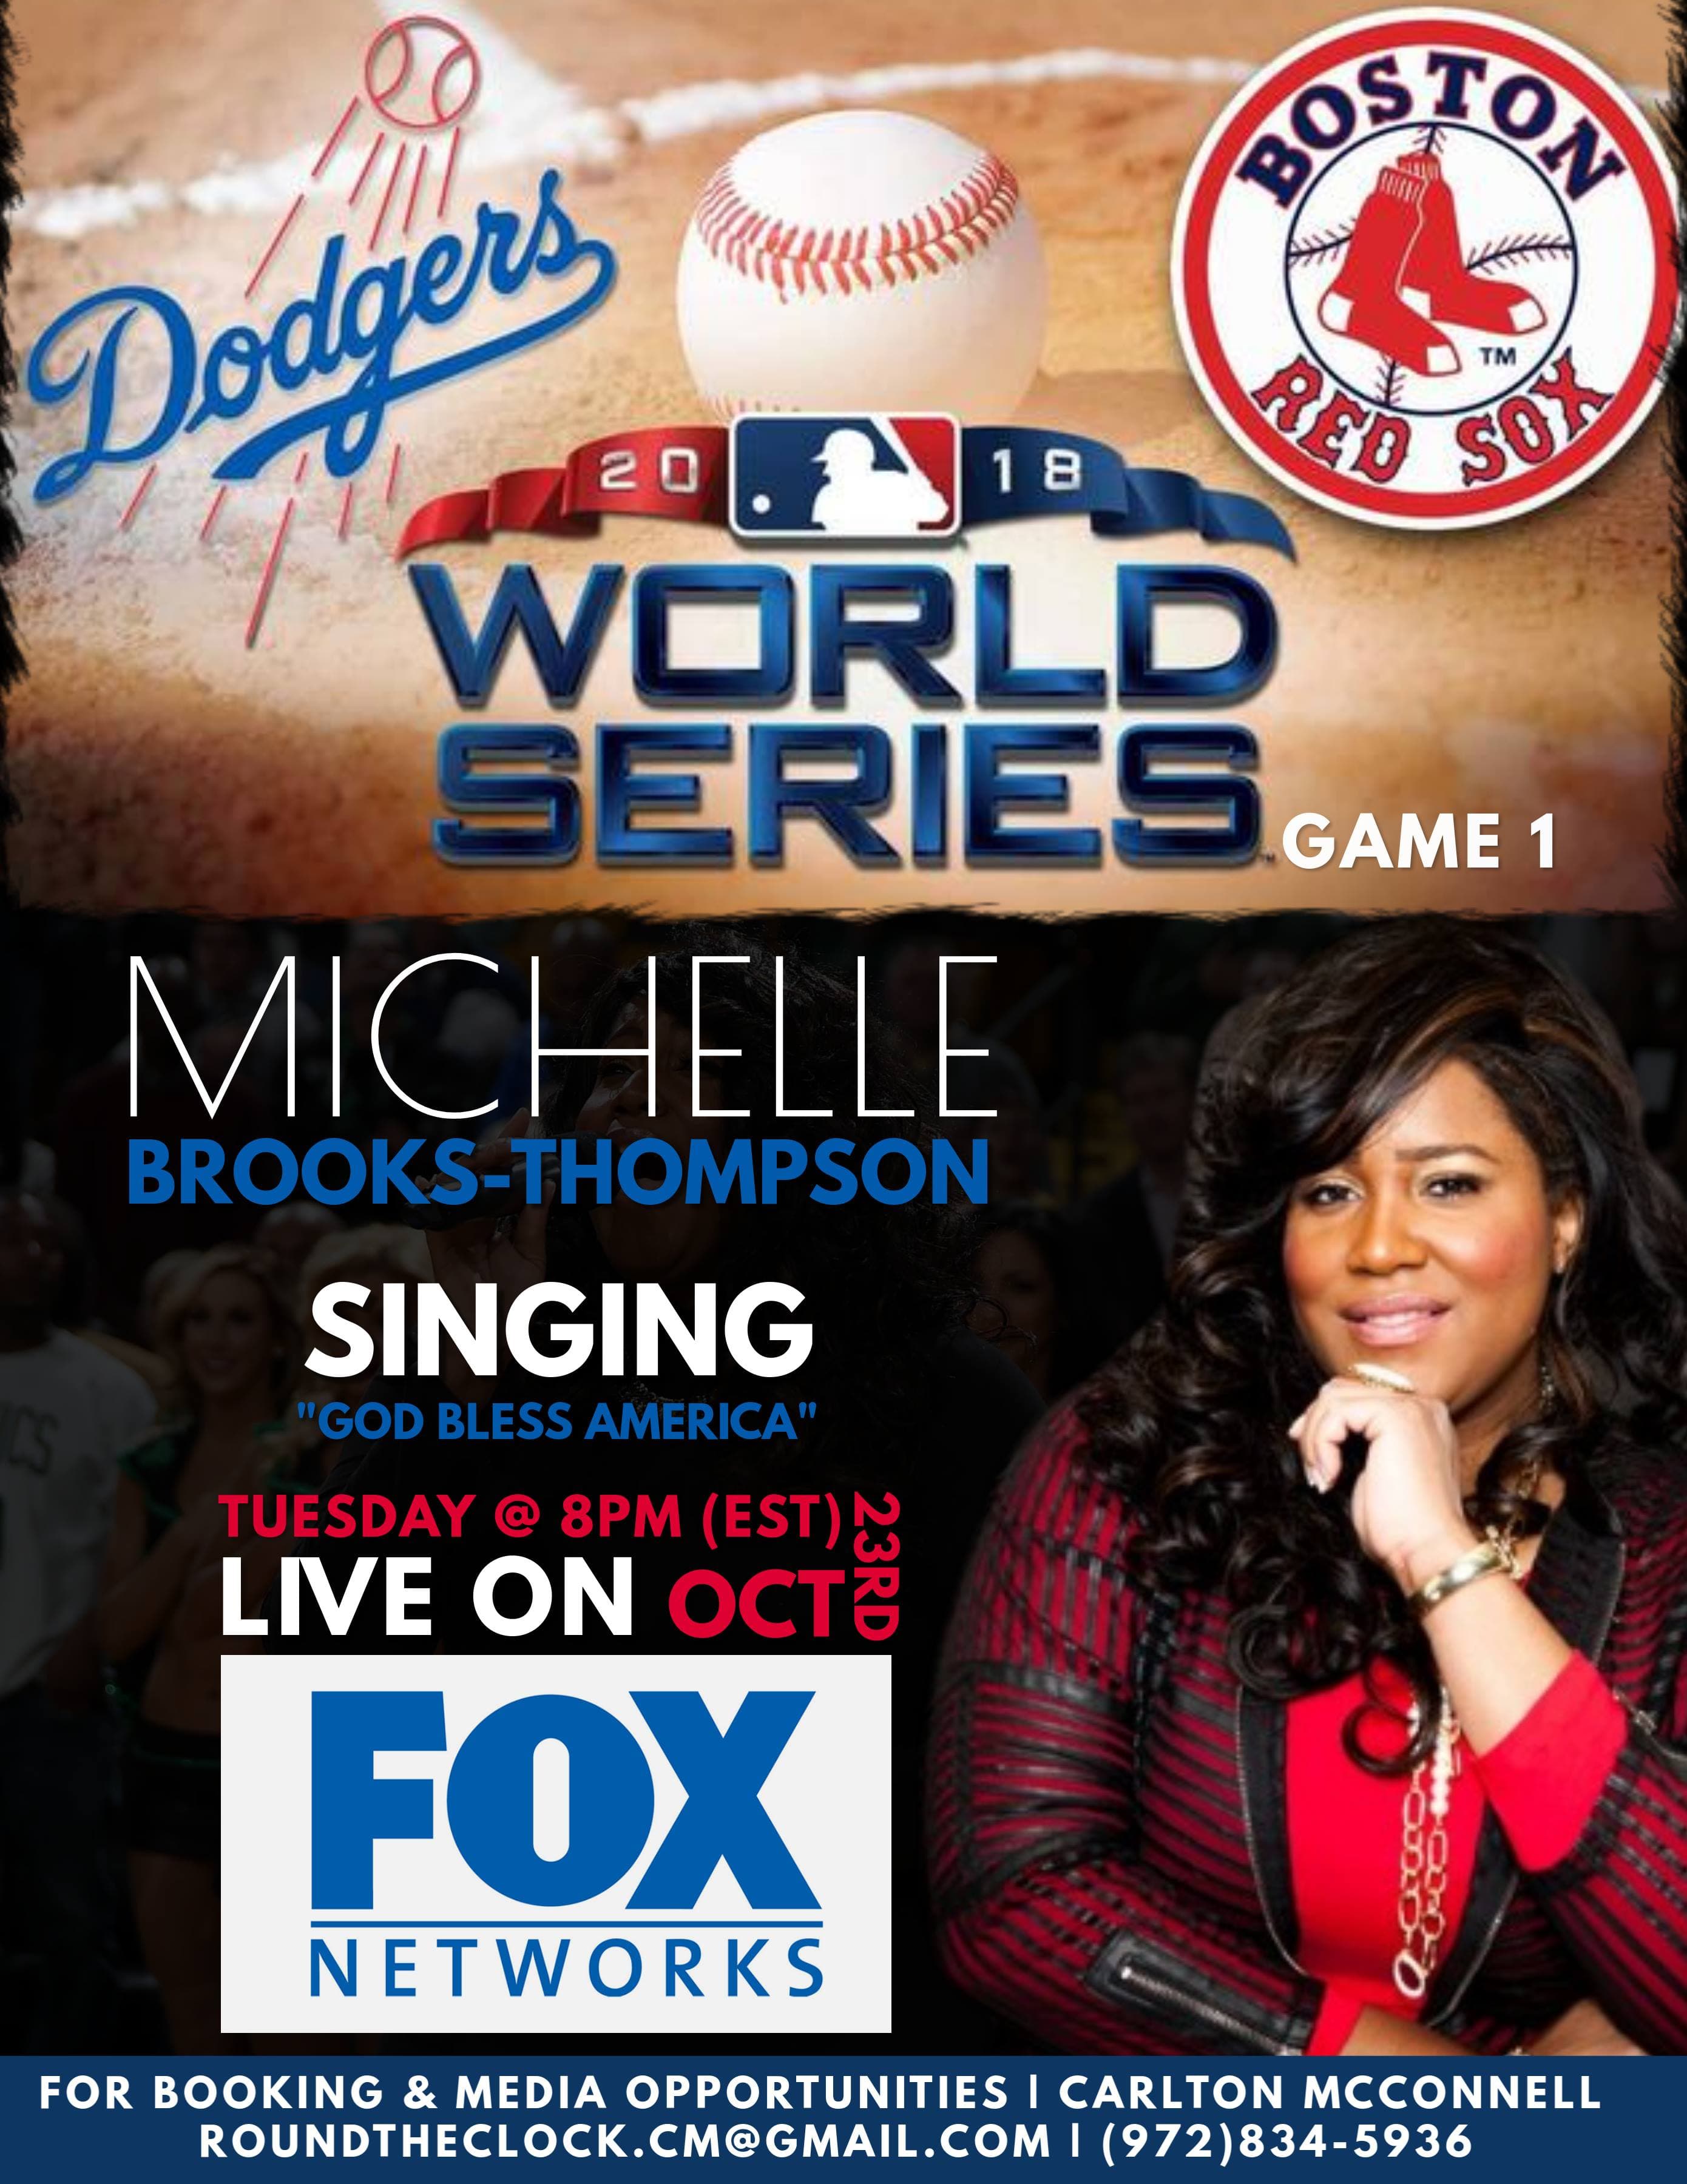 Michelle Brooks-Thompson to Perform During Game 1 of the World Series